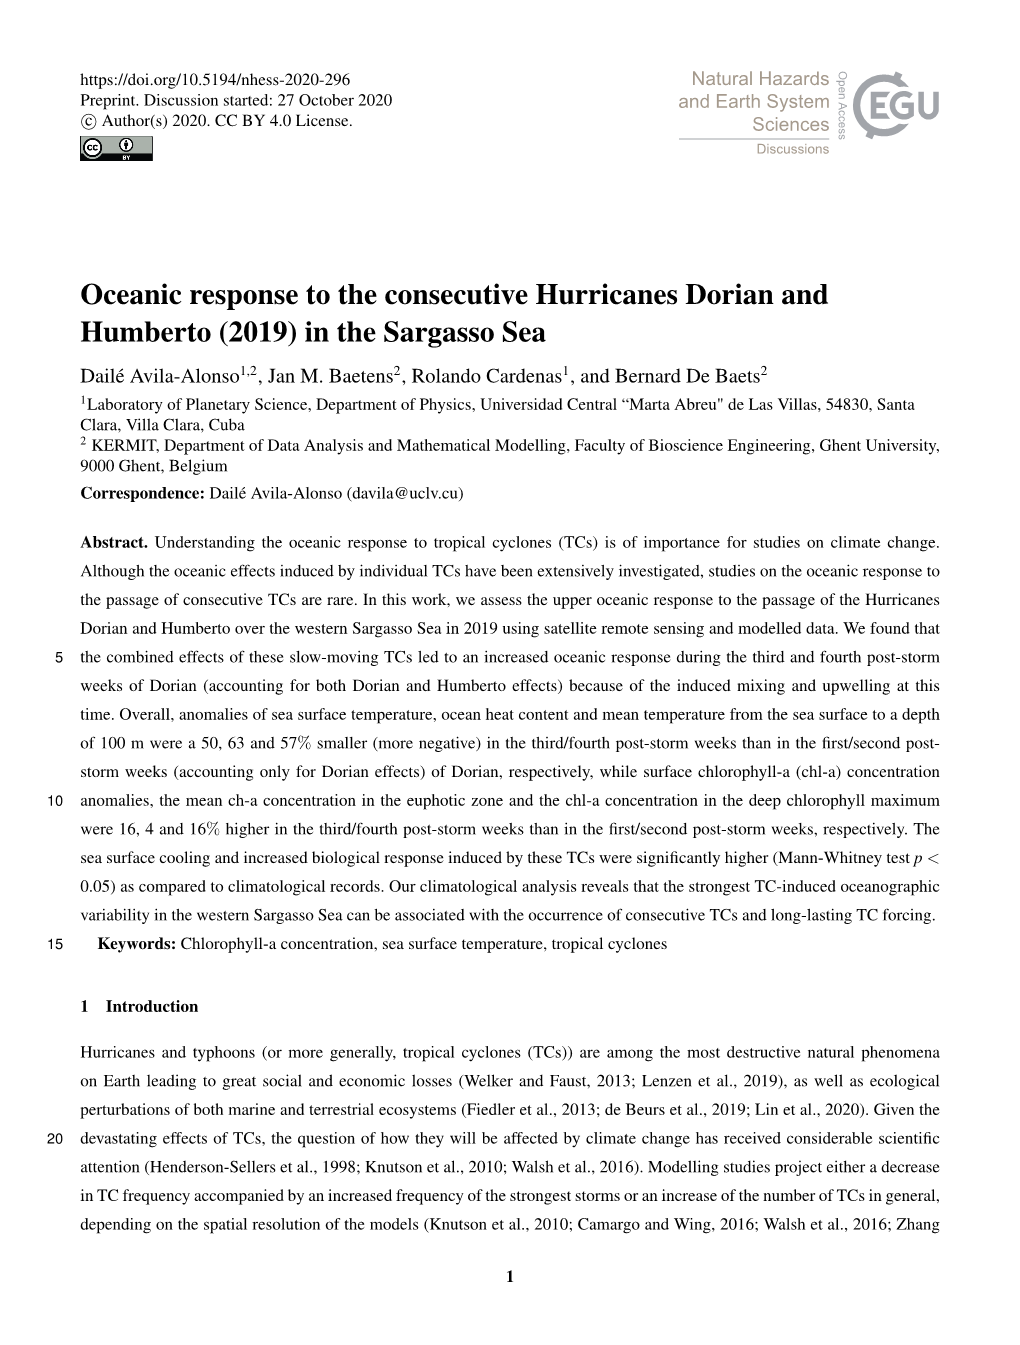 Oceanic Response to the Consecutive Hurricanes Dorian and Humberto (2019) in the Sargasso Sea Dailé Avila-Alonso1,2, Jan M